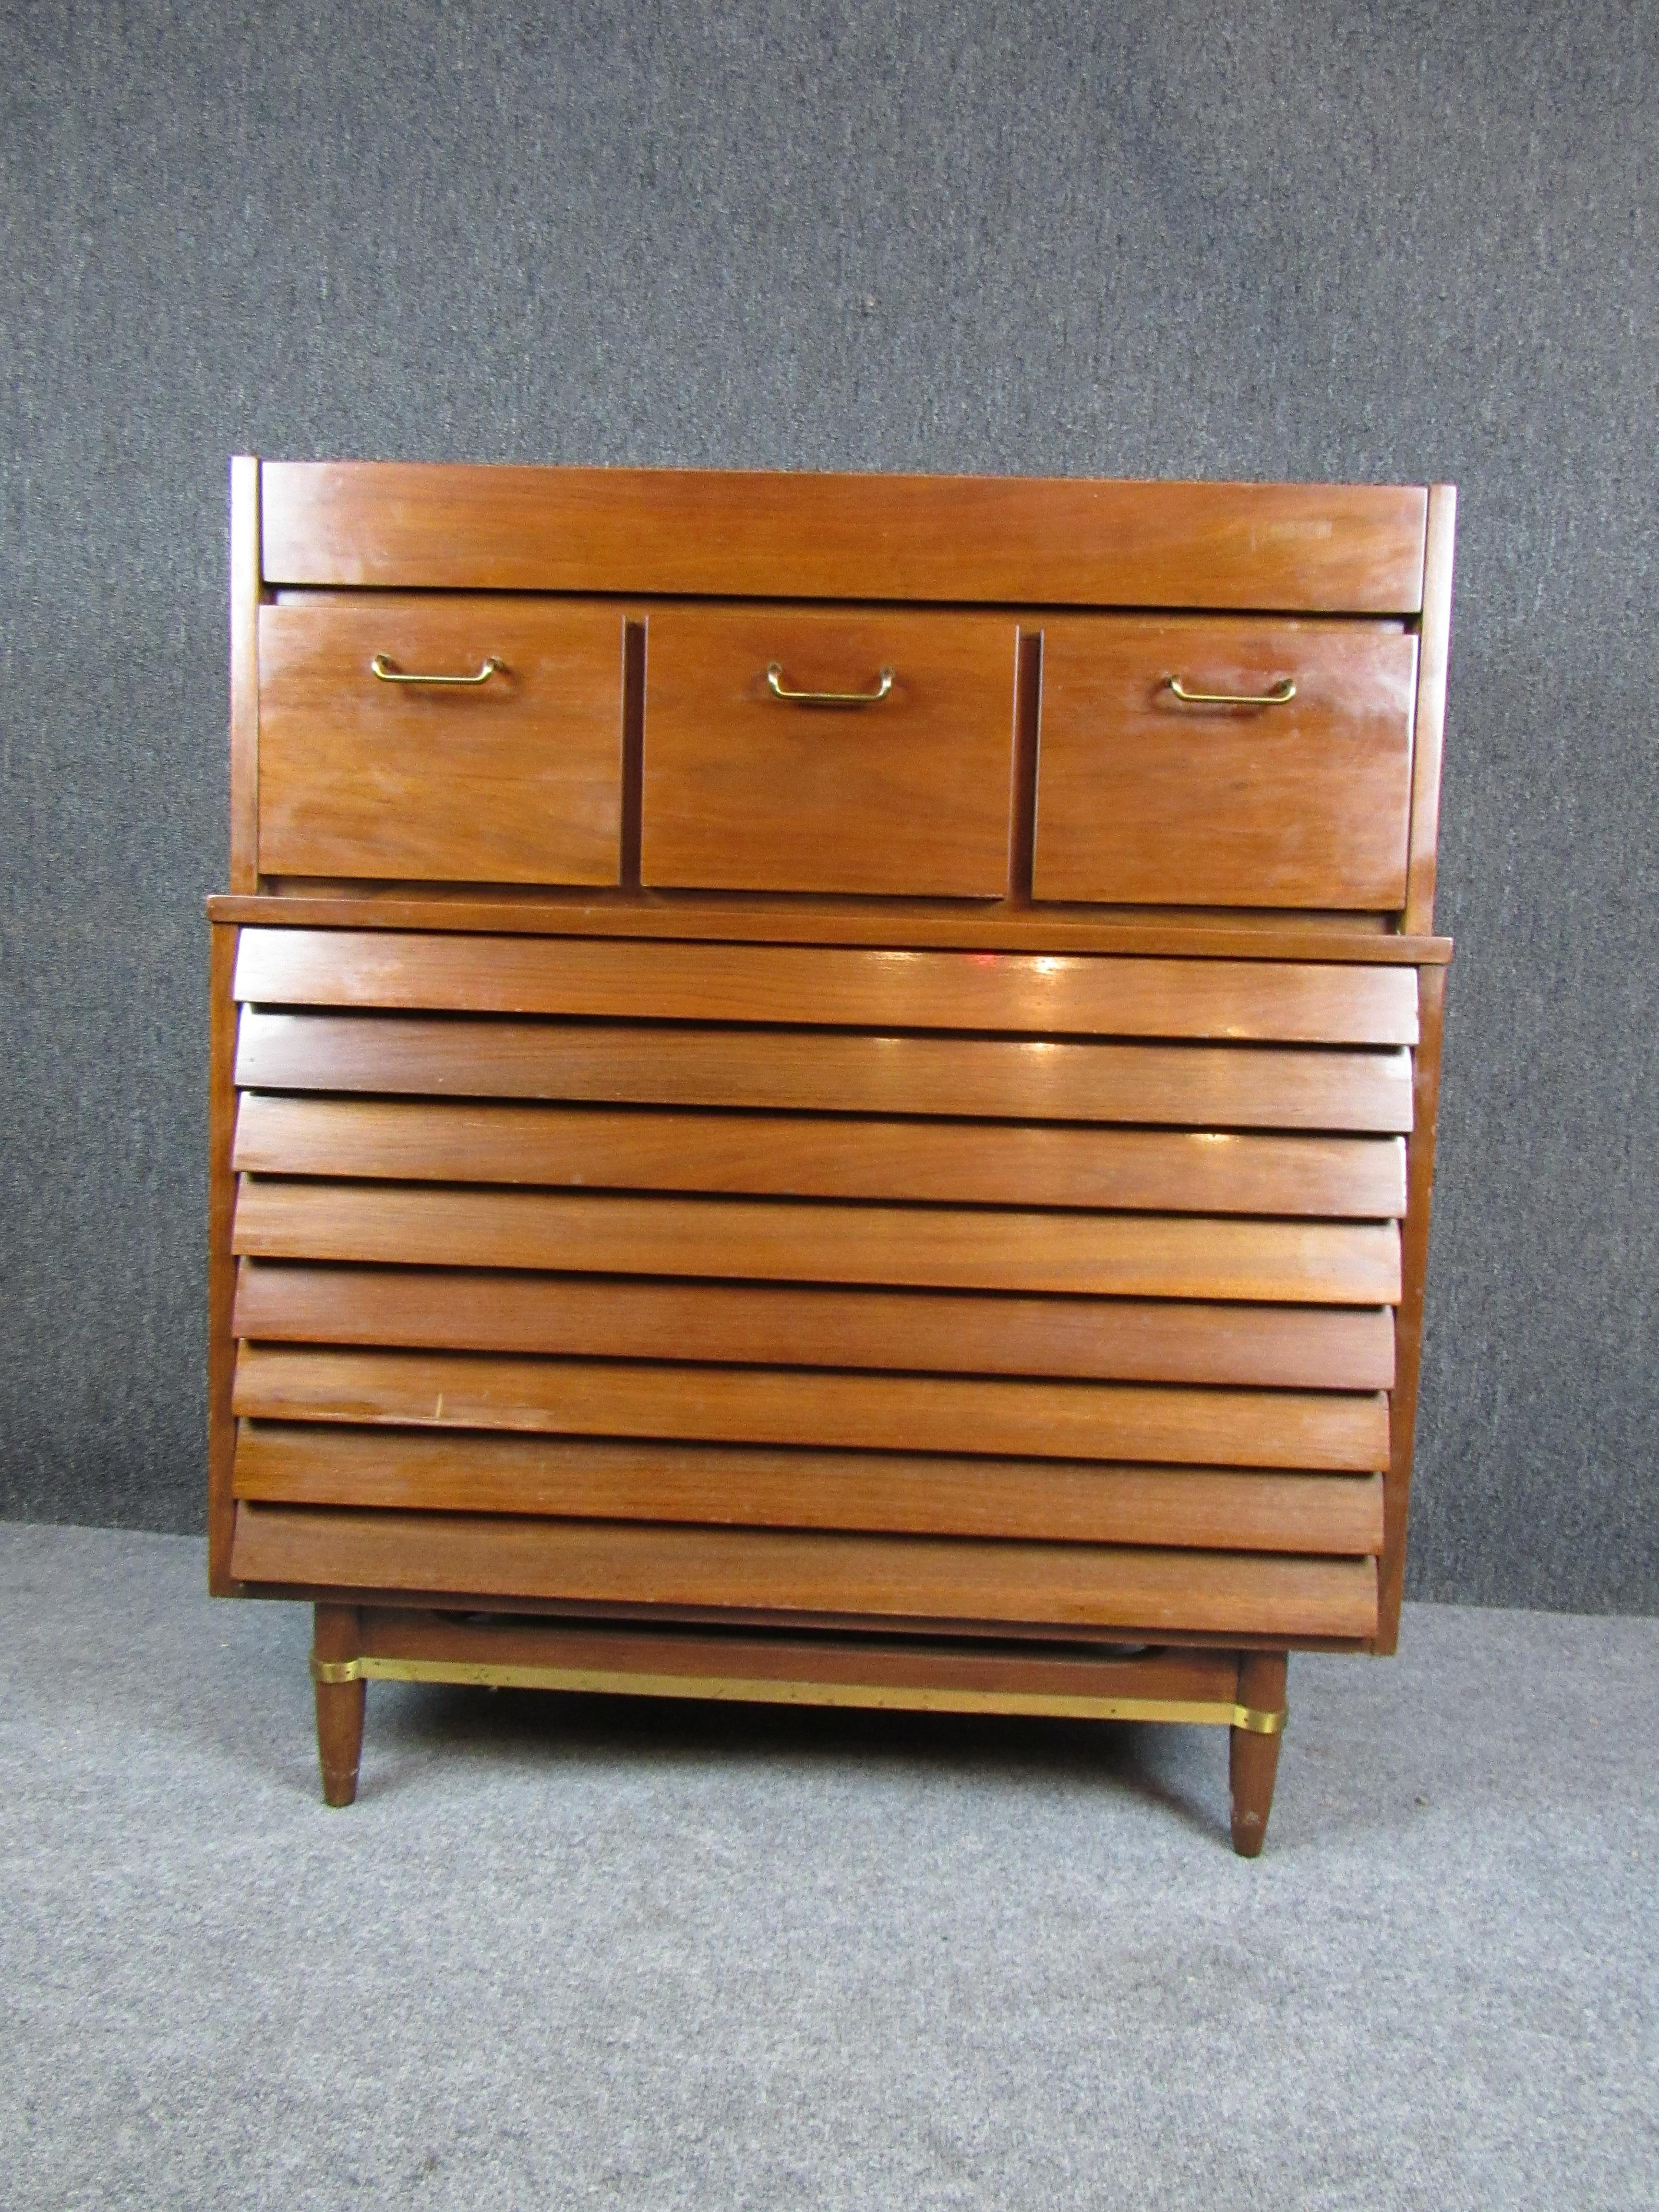 Bring home a tremendous example of authentic Mid-Century Modern furniture with this stunning dresser designed by the legendary Merton Gershun for the famed American of Martinsville furniture company. Built by genuine American craftsmen in the